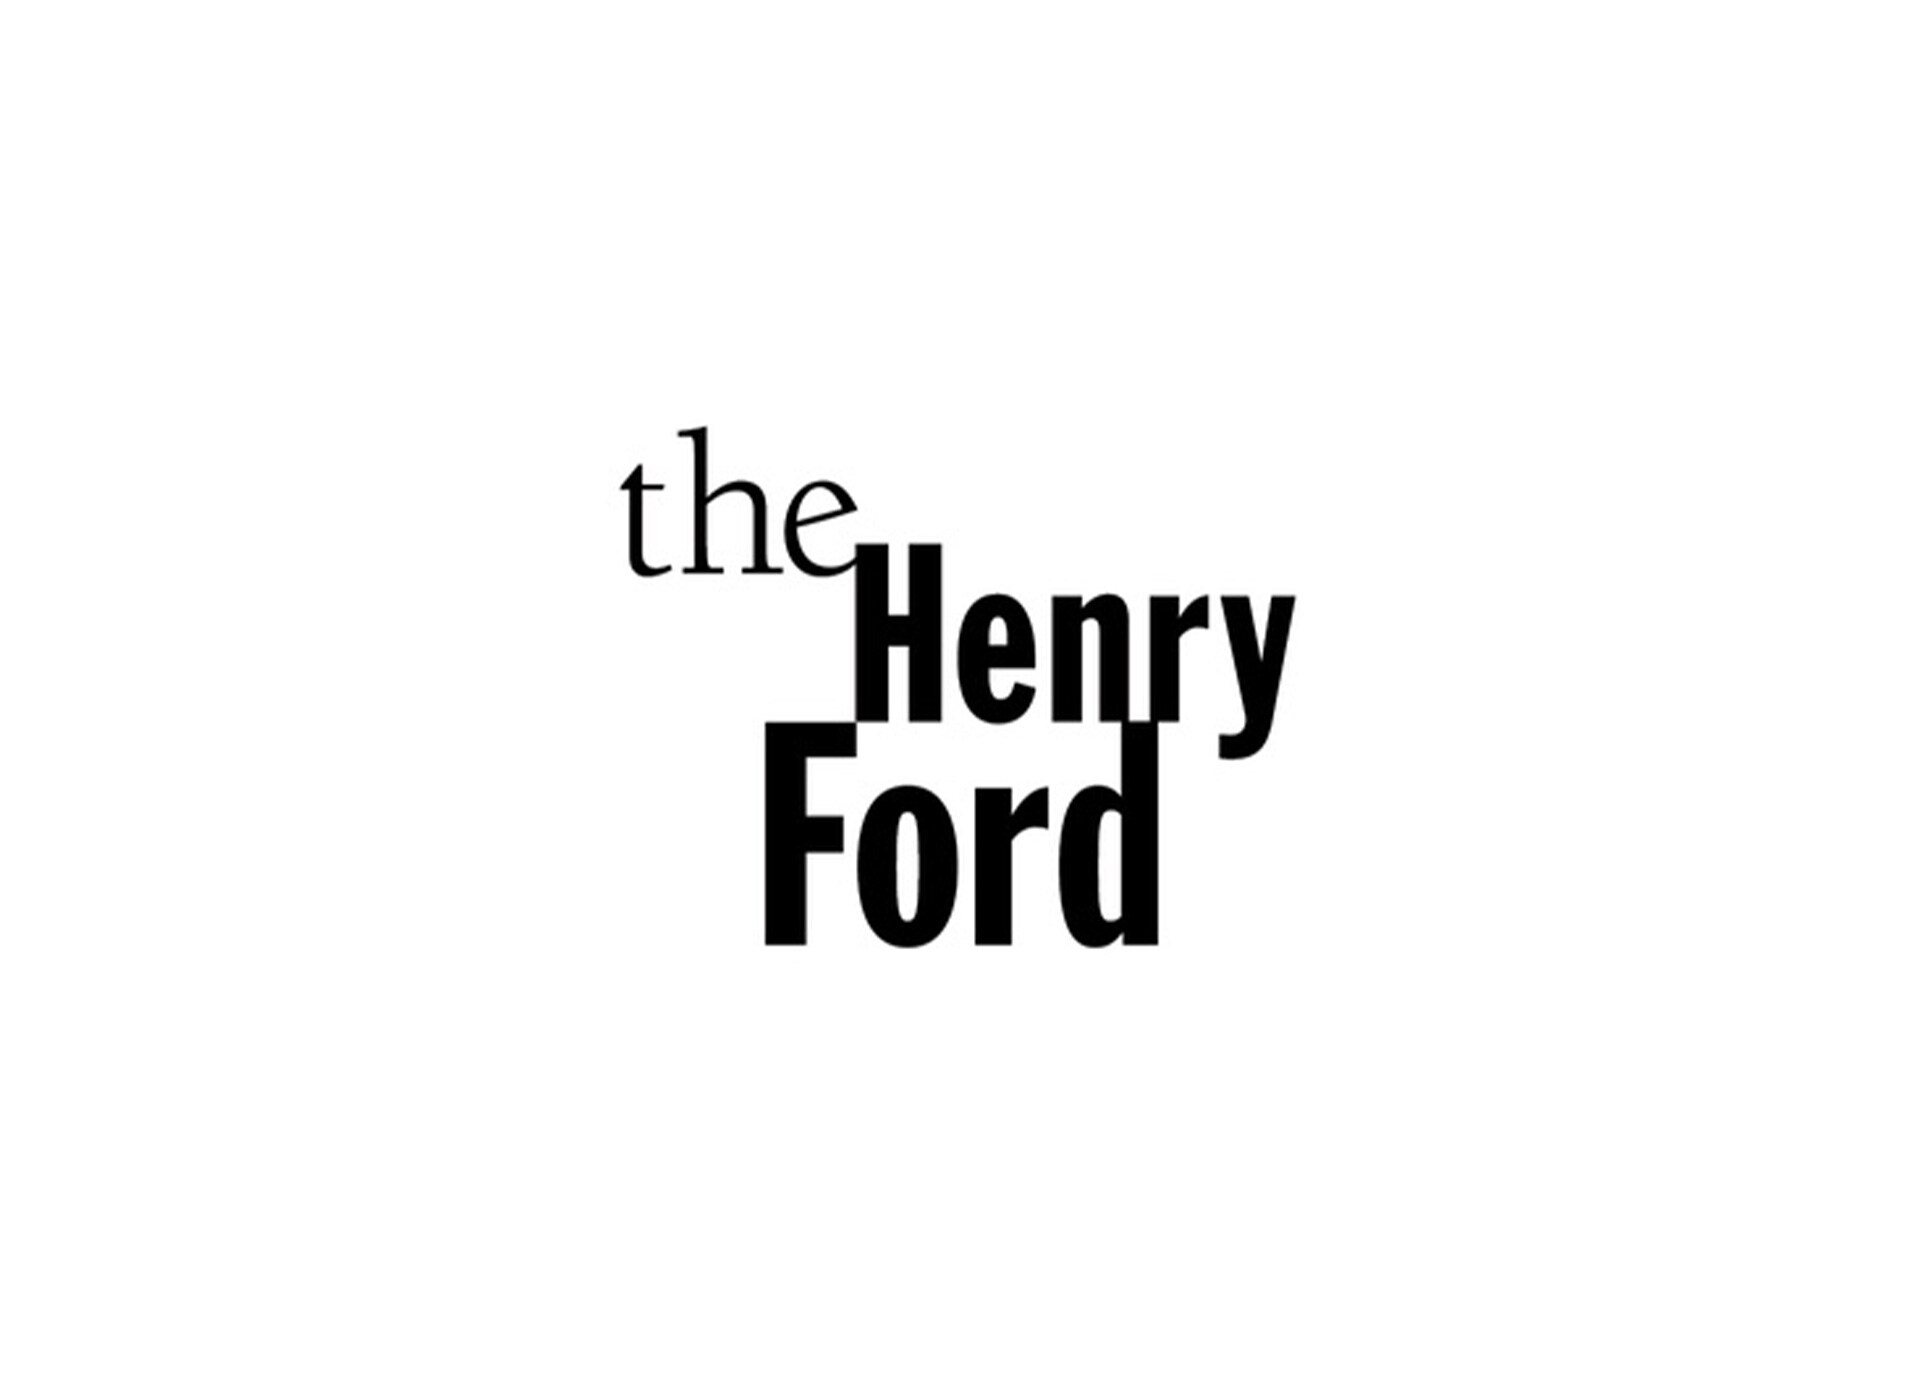 The Henry Ford logo